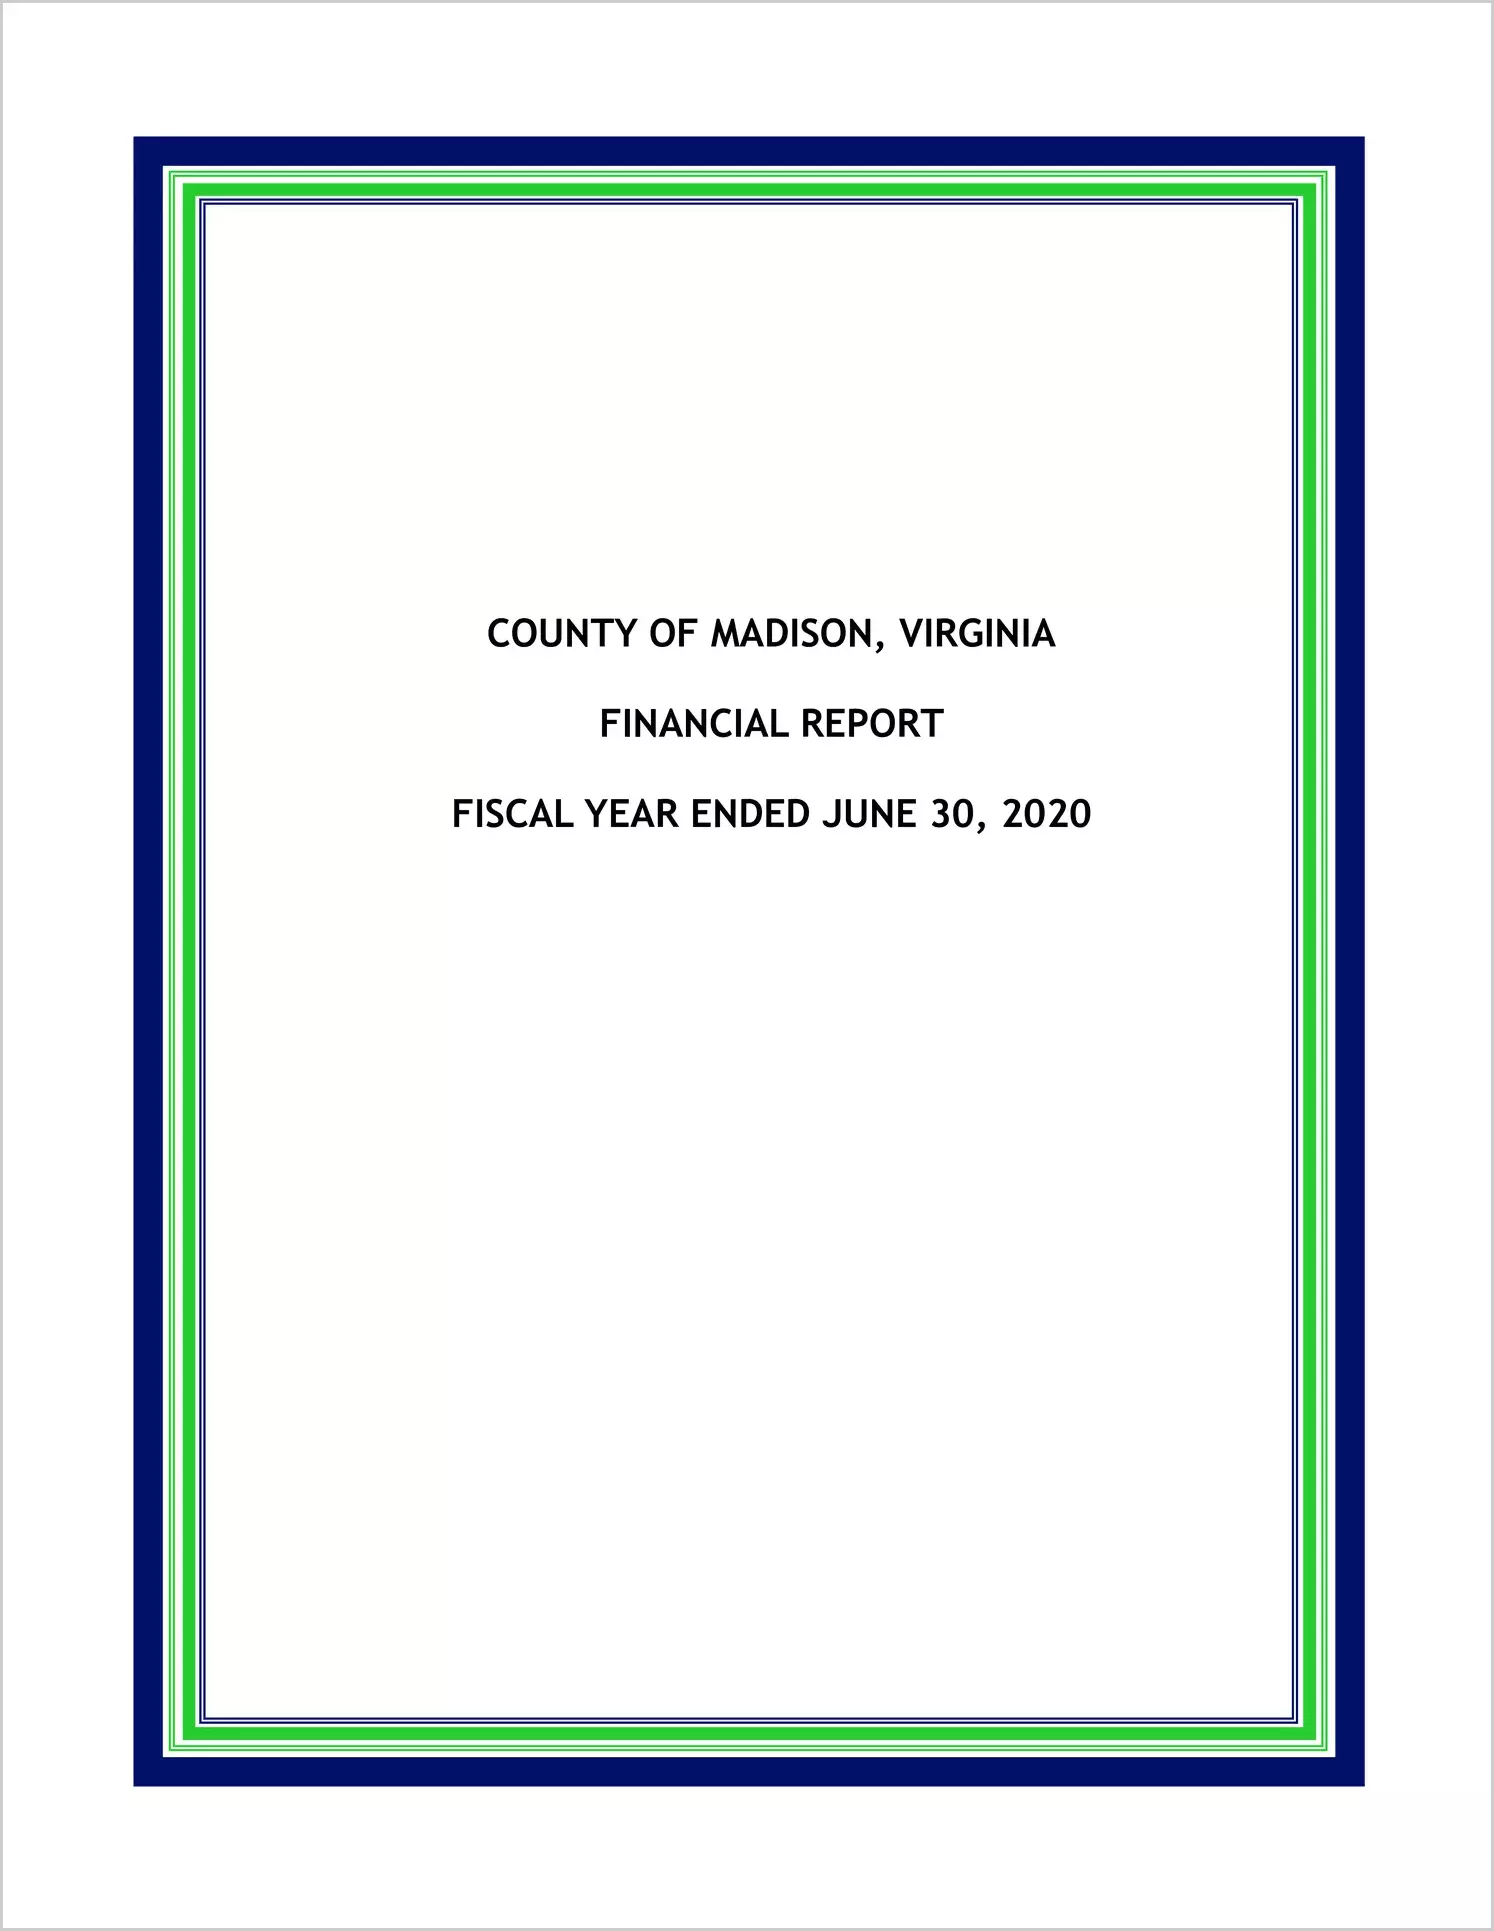 2020 Annual Financial Report for County of Madison